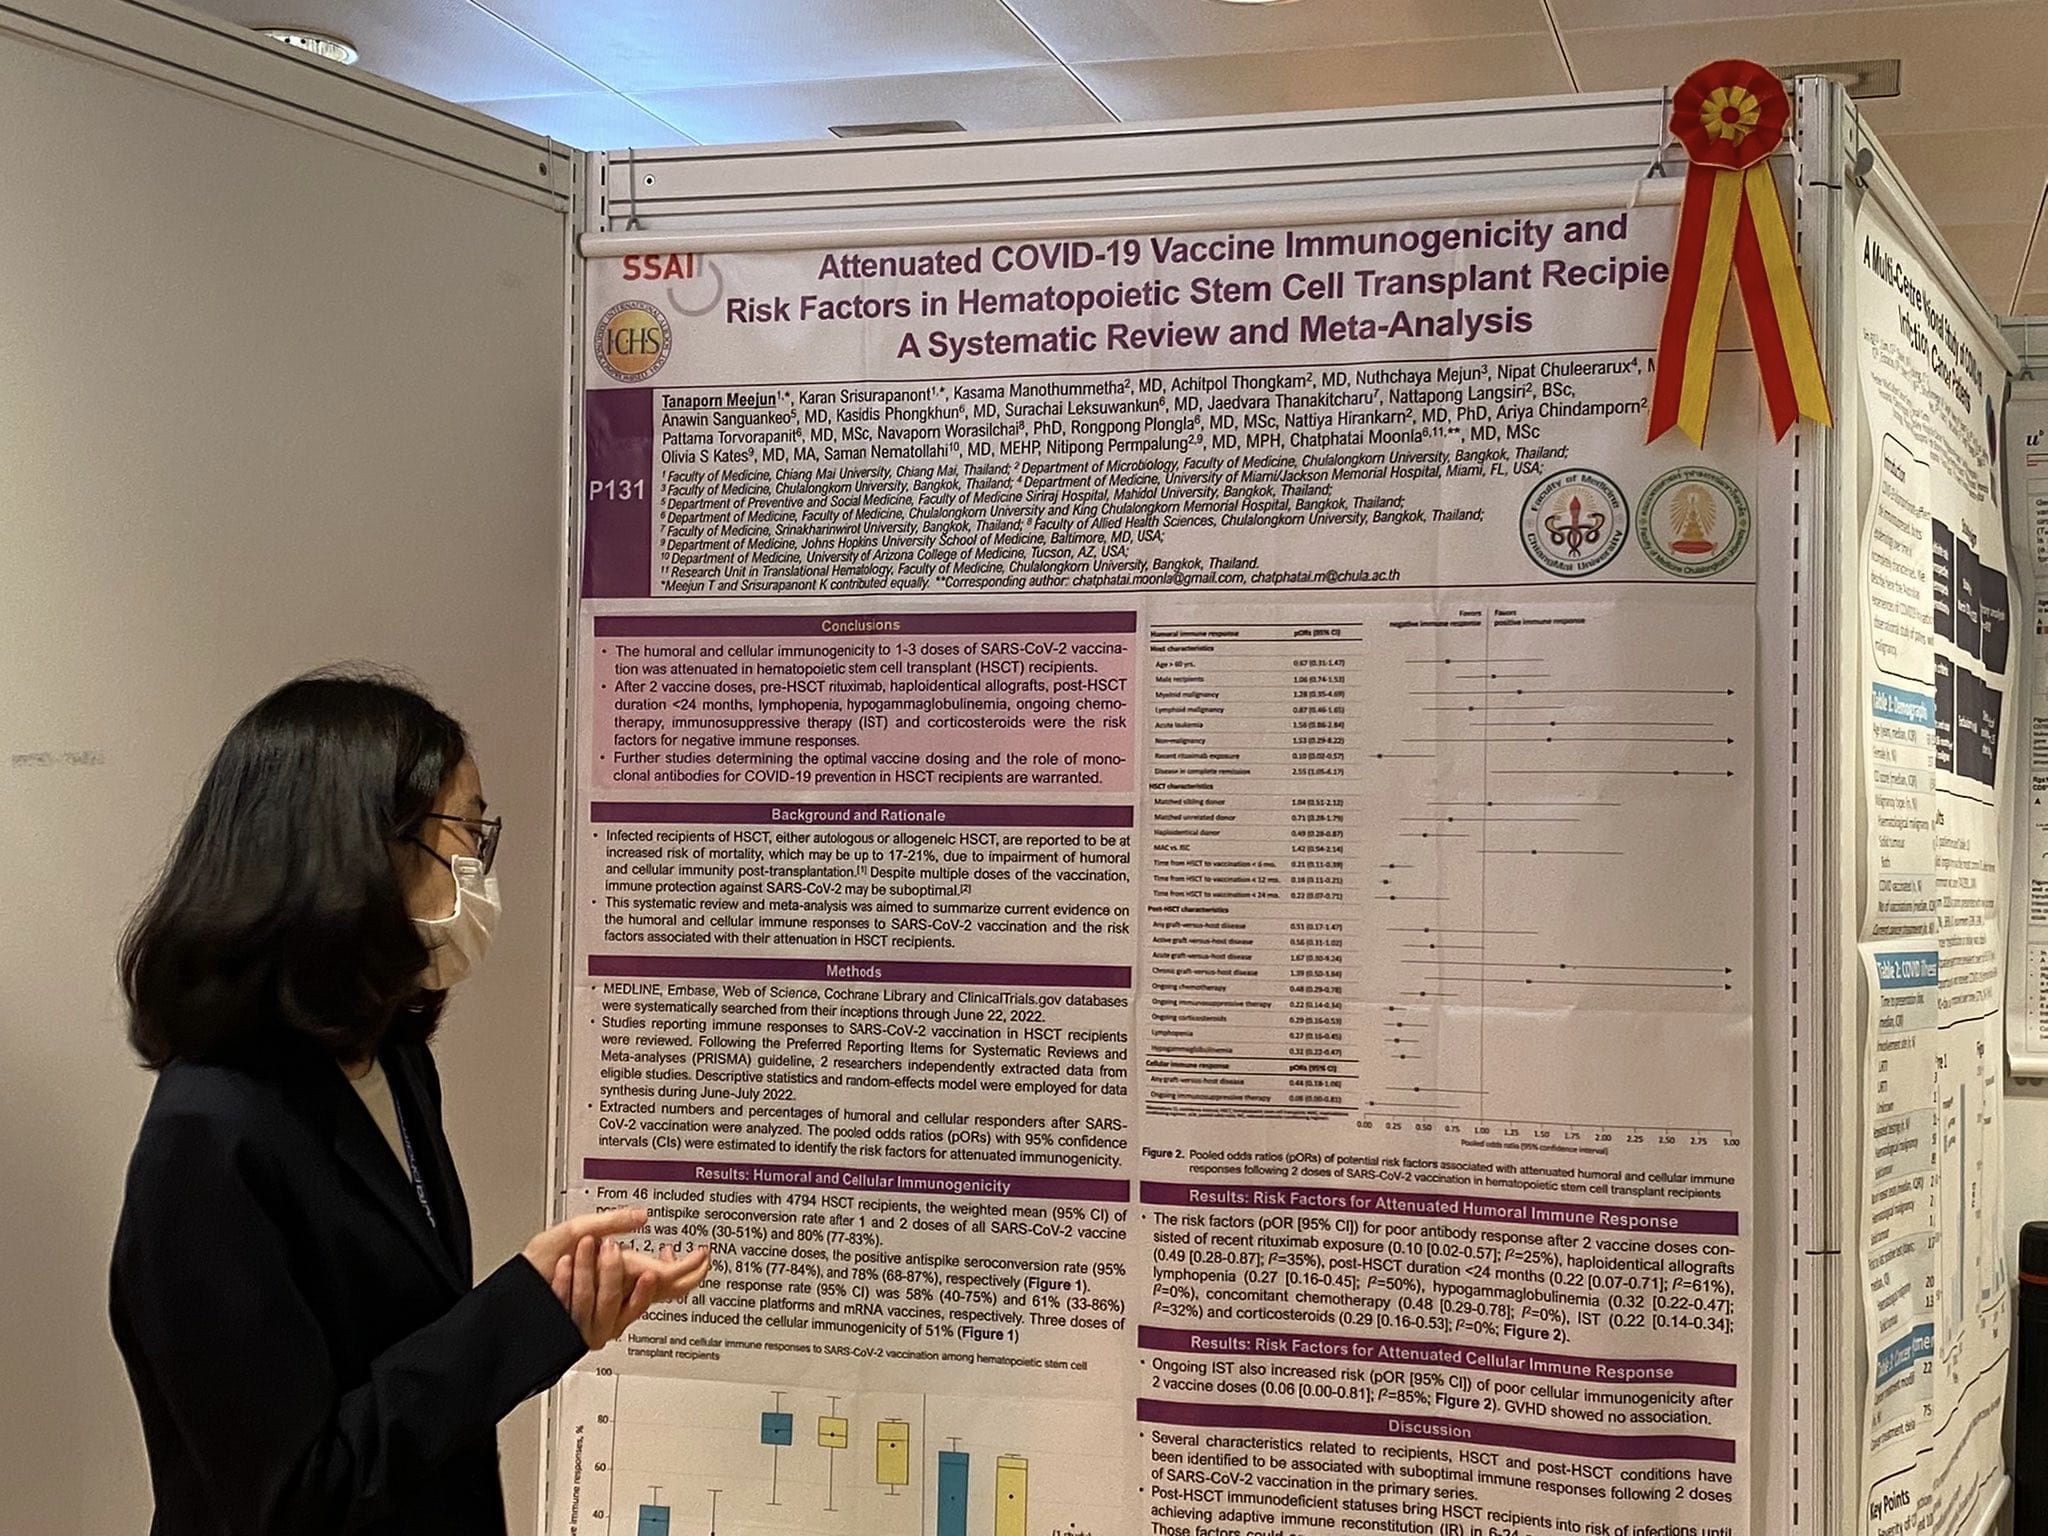 In September 2022, Mark Manothummetha and Pan Meejun were selected to present their works during the Poster Rounds at the 2022 ICHS Conference and both were awarded travel grants.